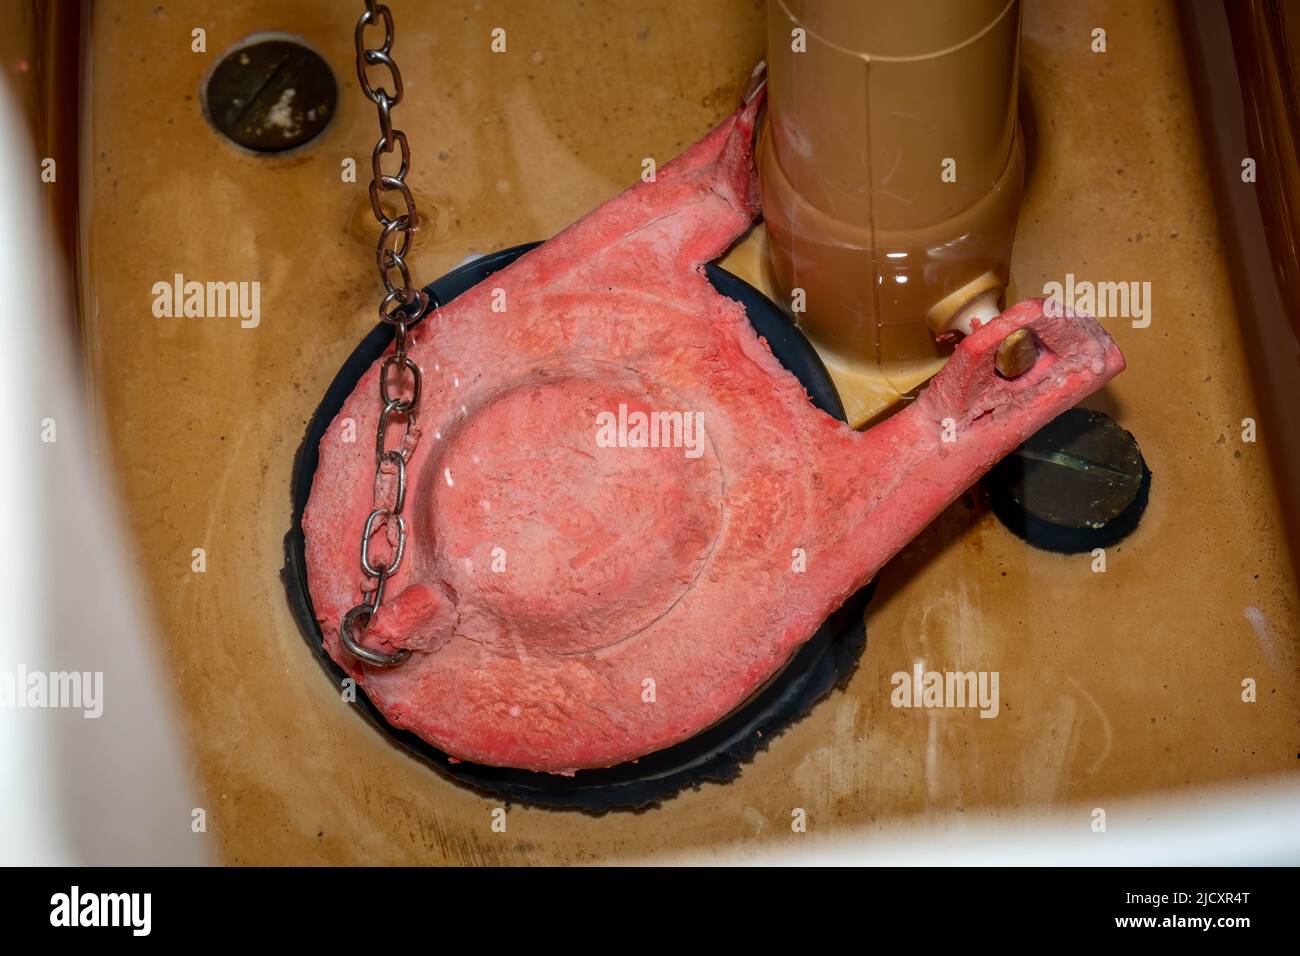 A rubber flapper valve in the toilet tank illustrating severe chlorine damage. Stock Photo